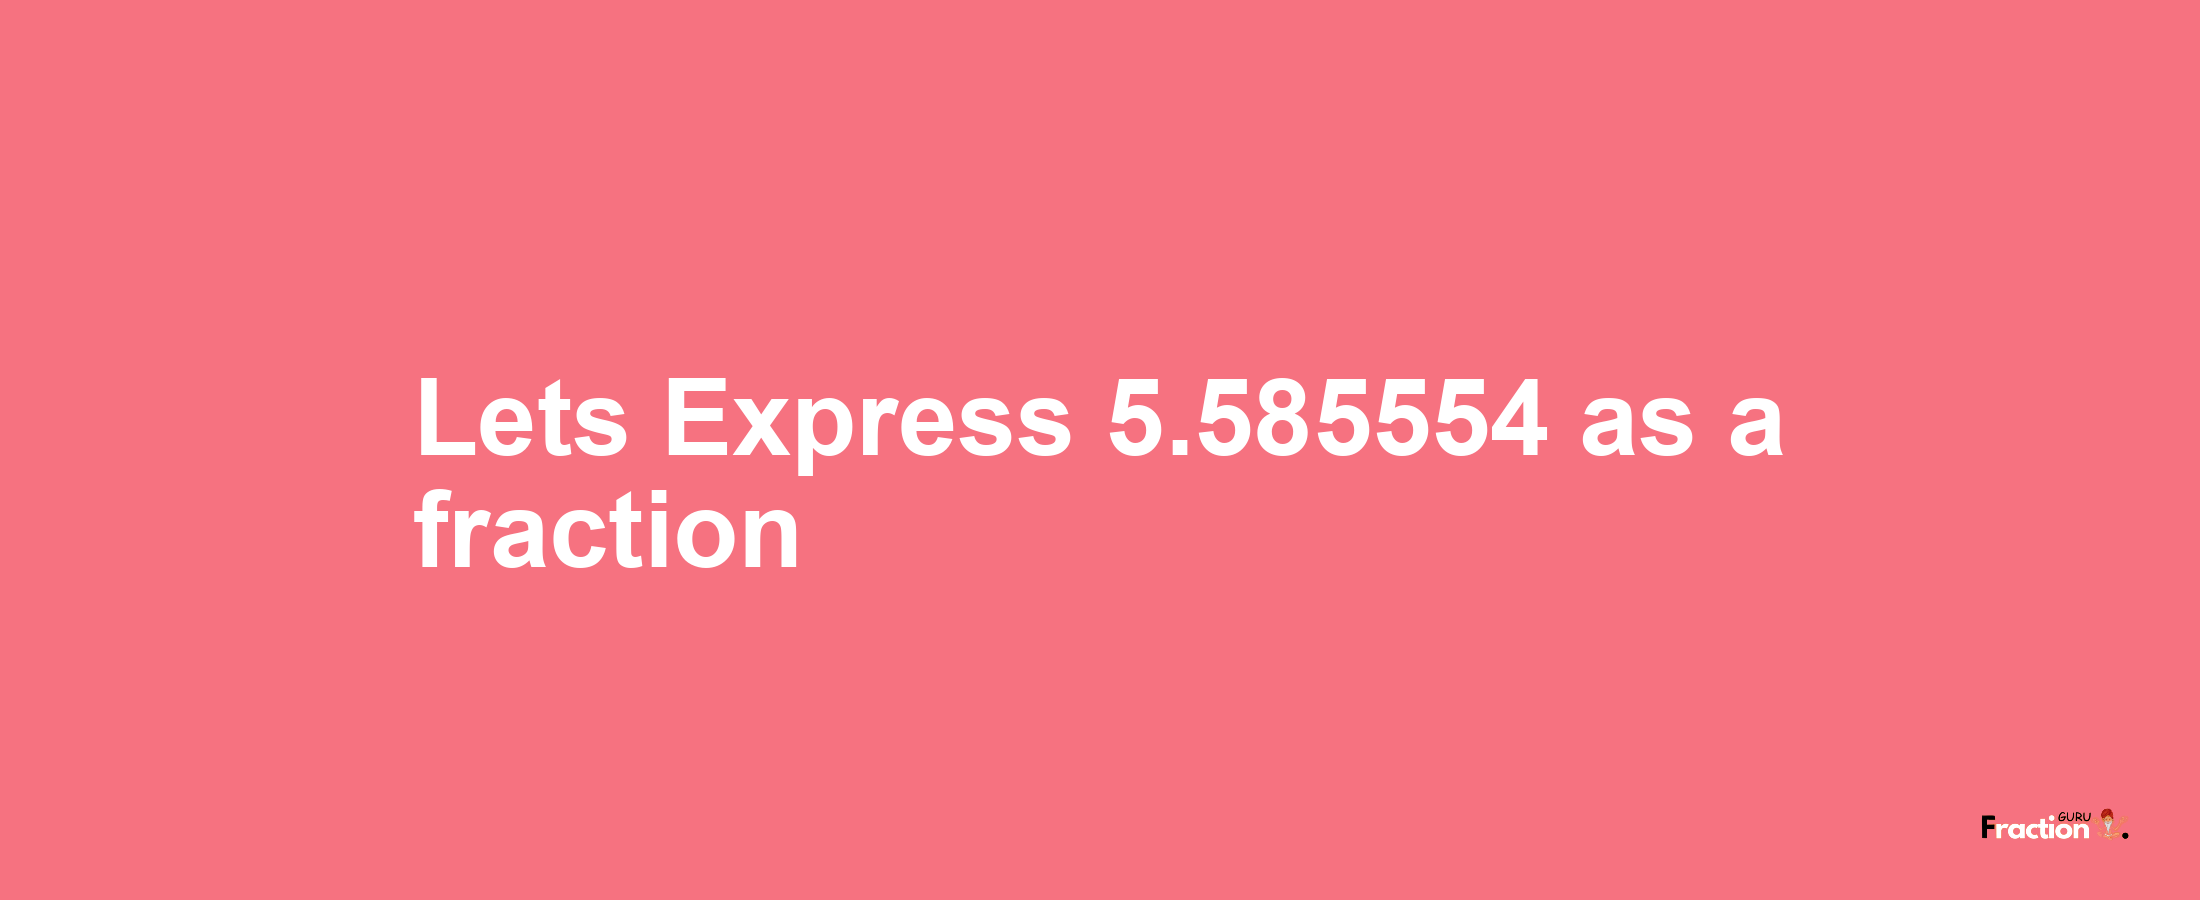 Lets Express 5.585554 as afraction